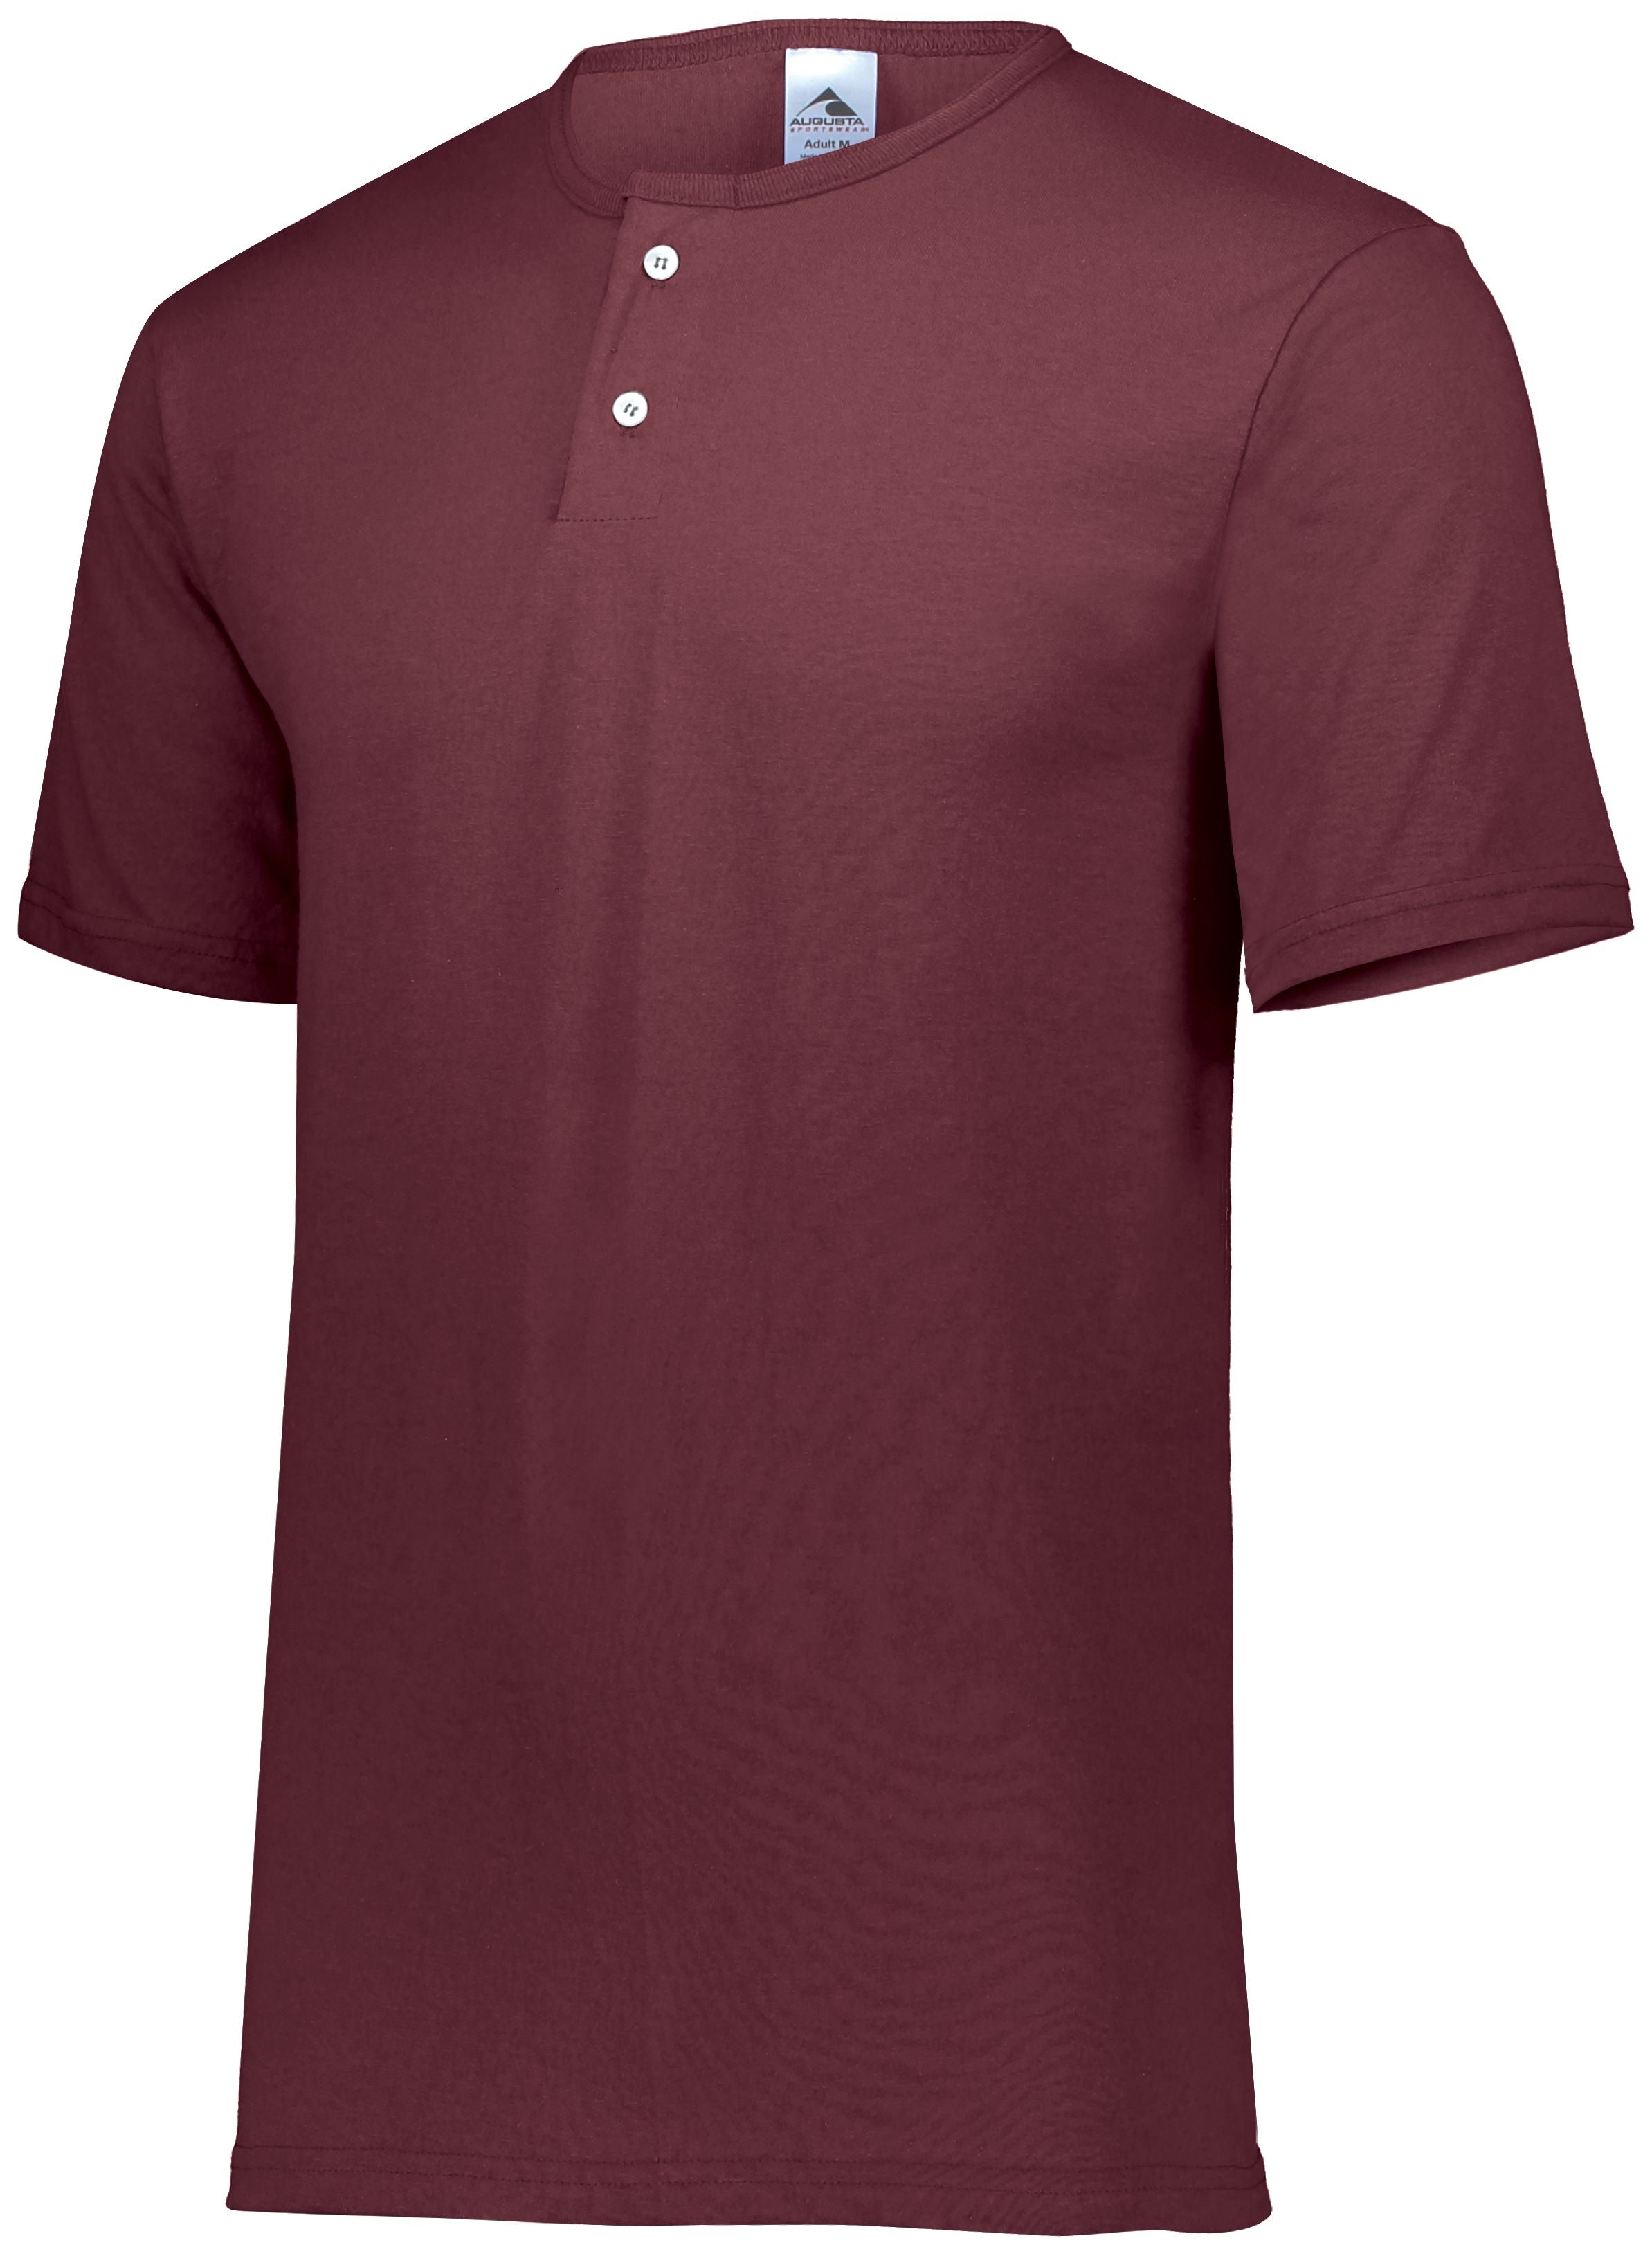 Augusta Sportswear Two-Button Baseball Jersey in Maroon  -Part of the Adult, Adult-Jersey, Augusta-Products, Baseball, Shirts, All-Sports, All-Sports-1 product lines at KanaleyCreations.com